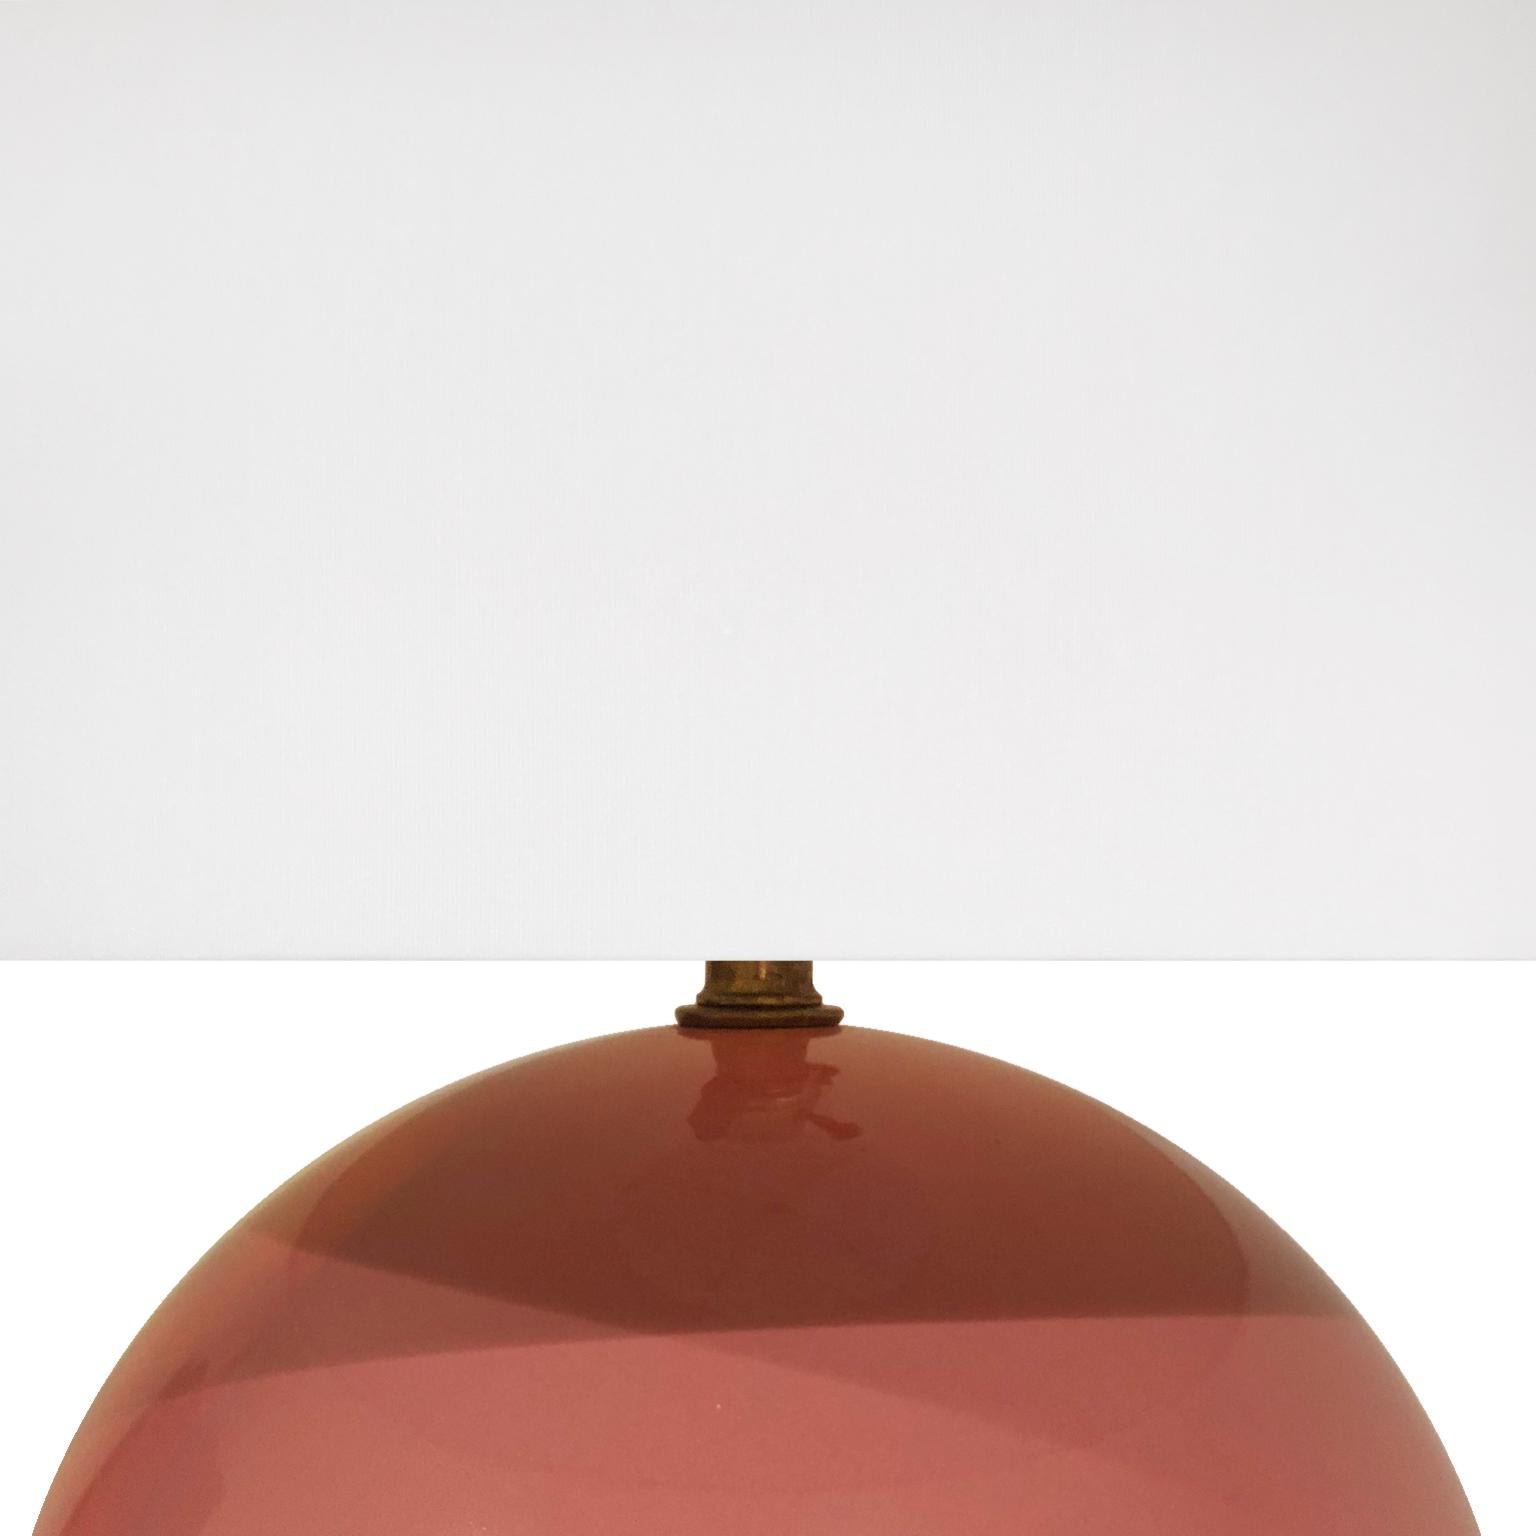 Round pink glaze ceramic table lamp. USA, 1970s.

Pair available, priced individually.